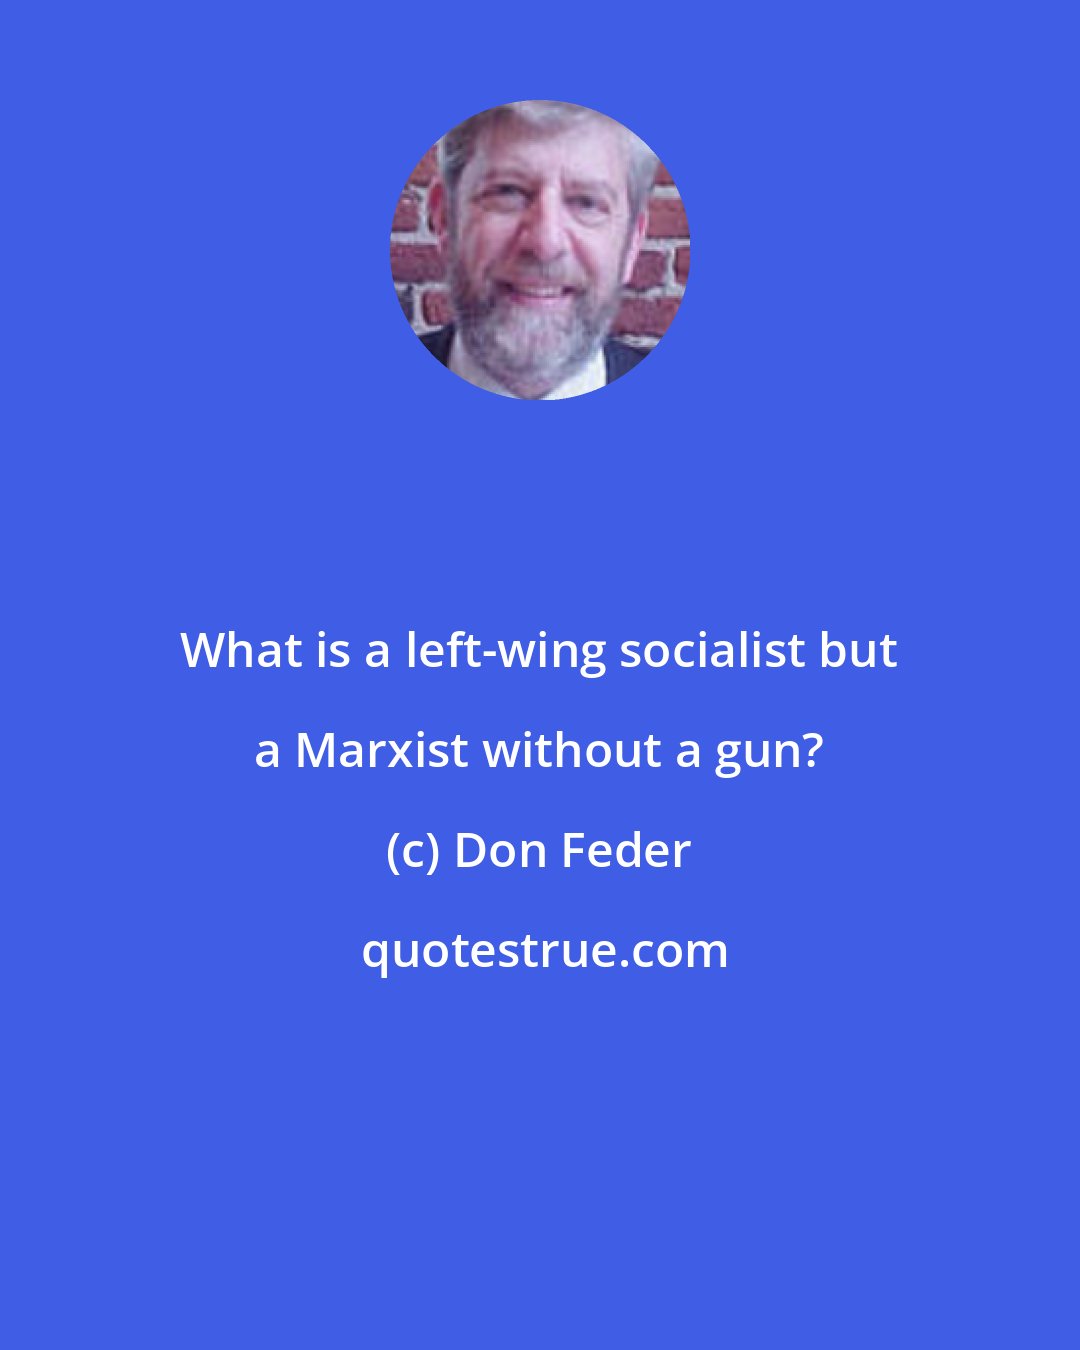 Don Feder: What is a left-wing socialist but a Marxist without a gun?